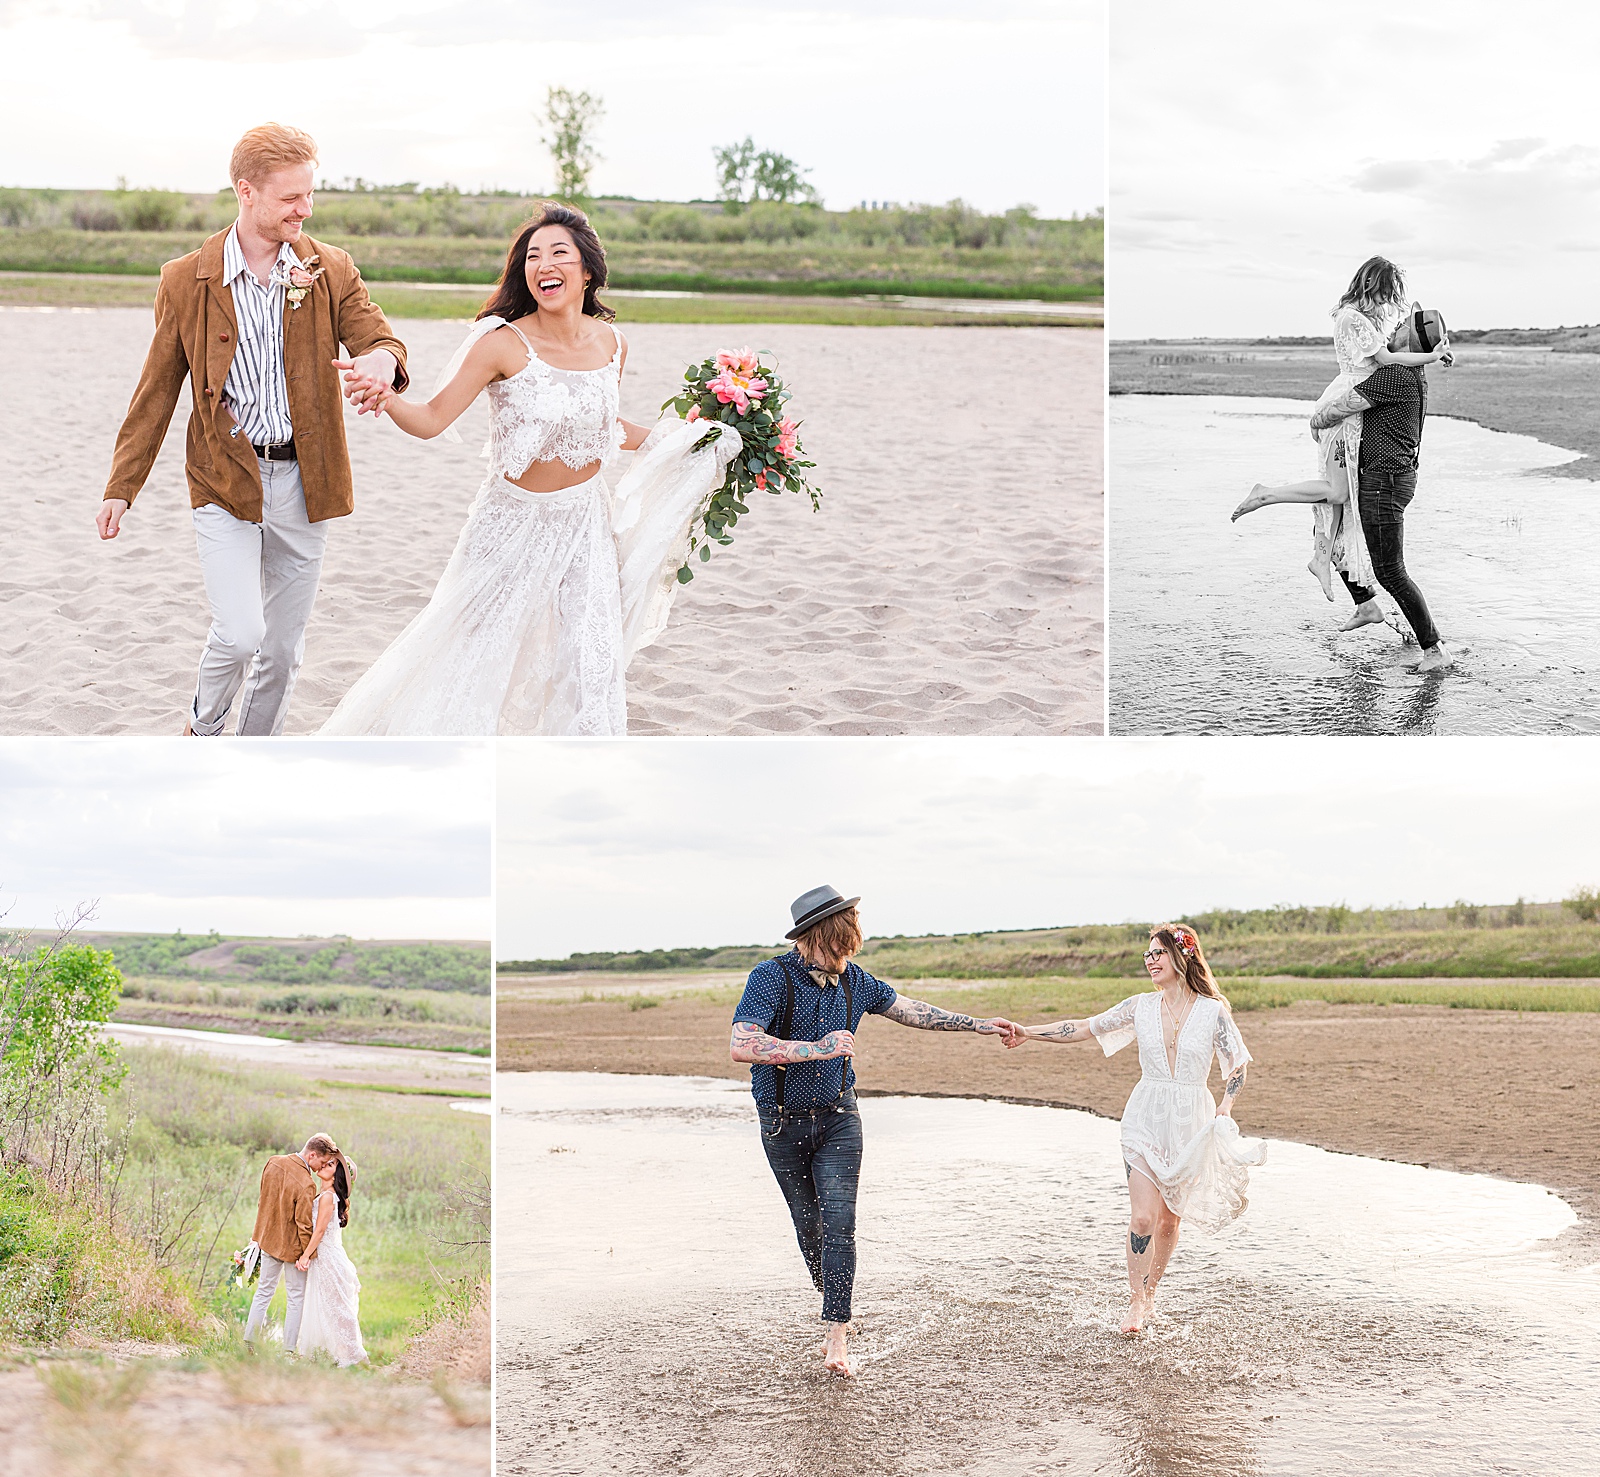 location example at South Sask River for eloping in Saskatchewan